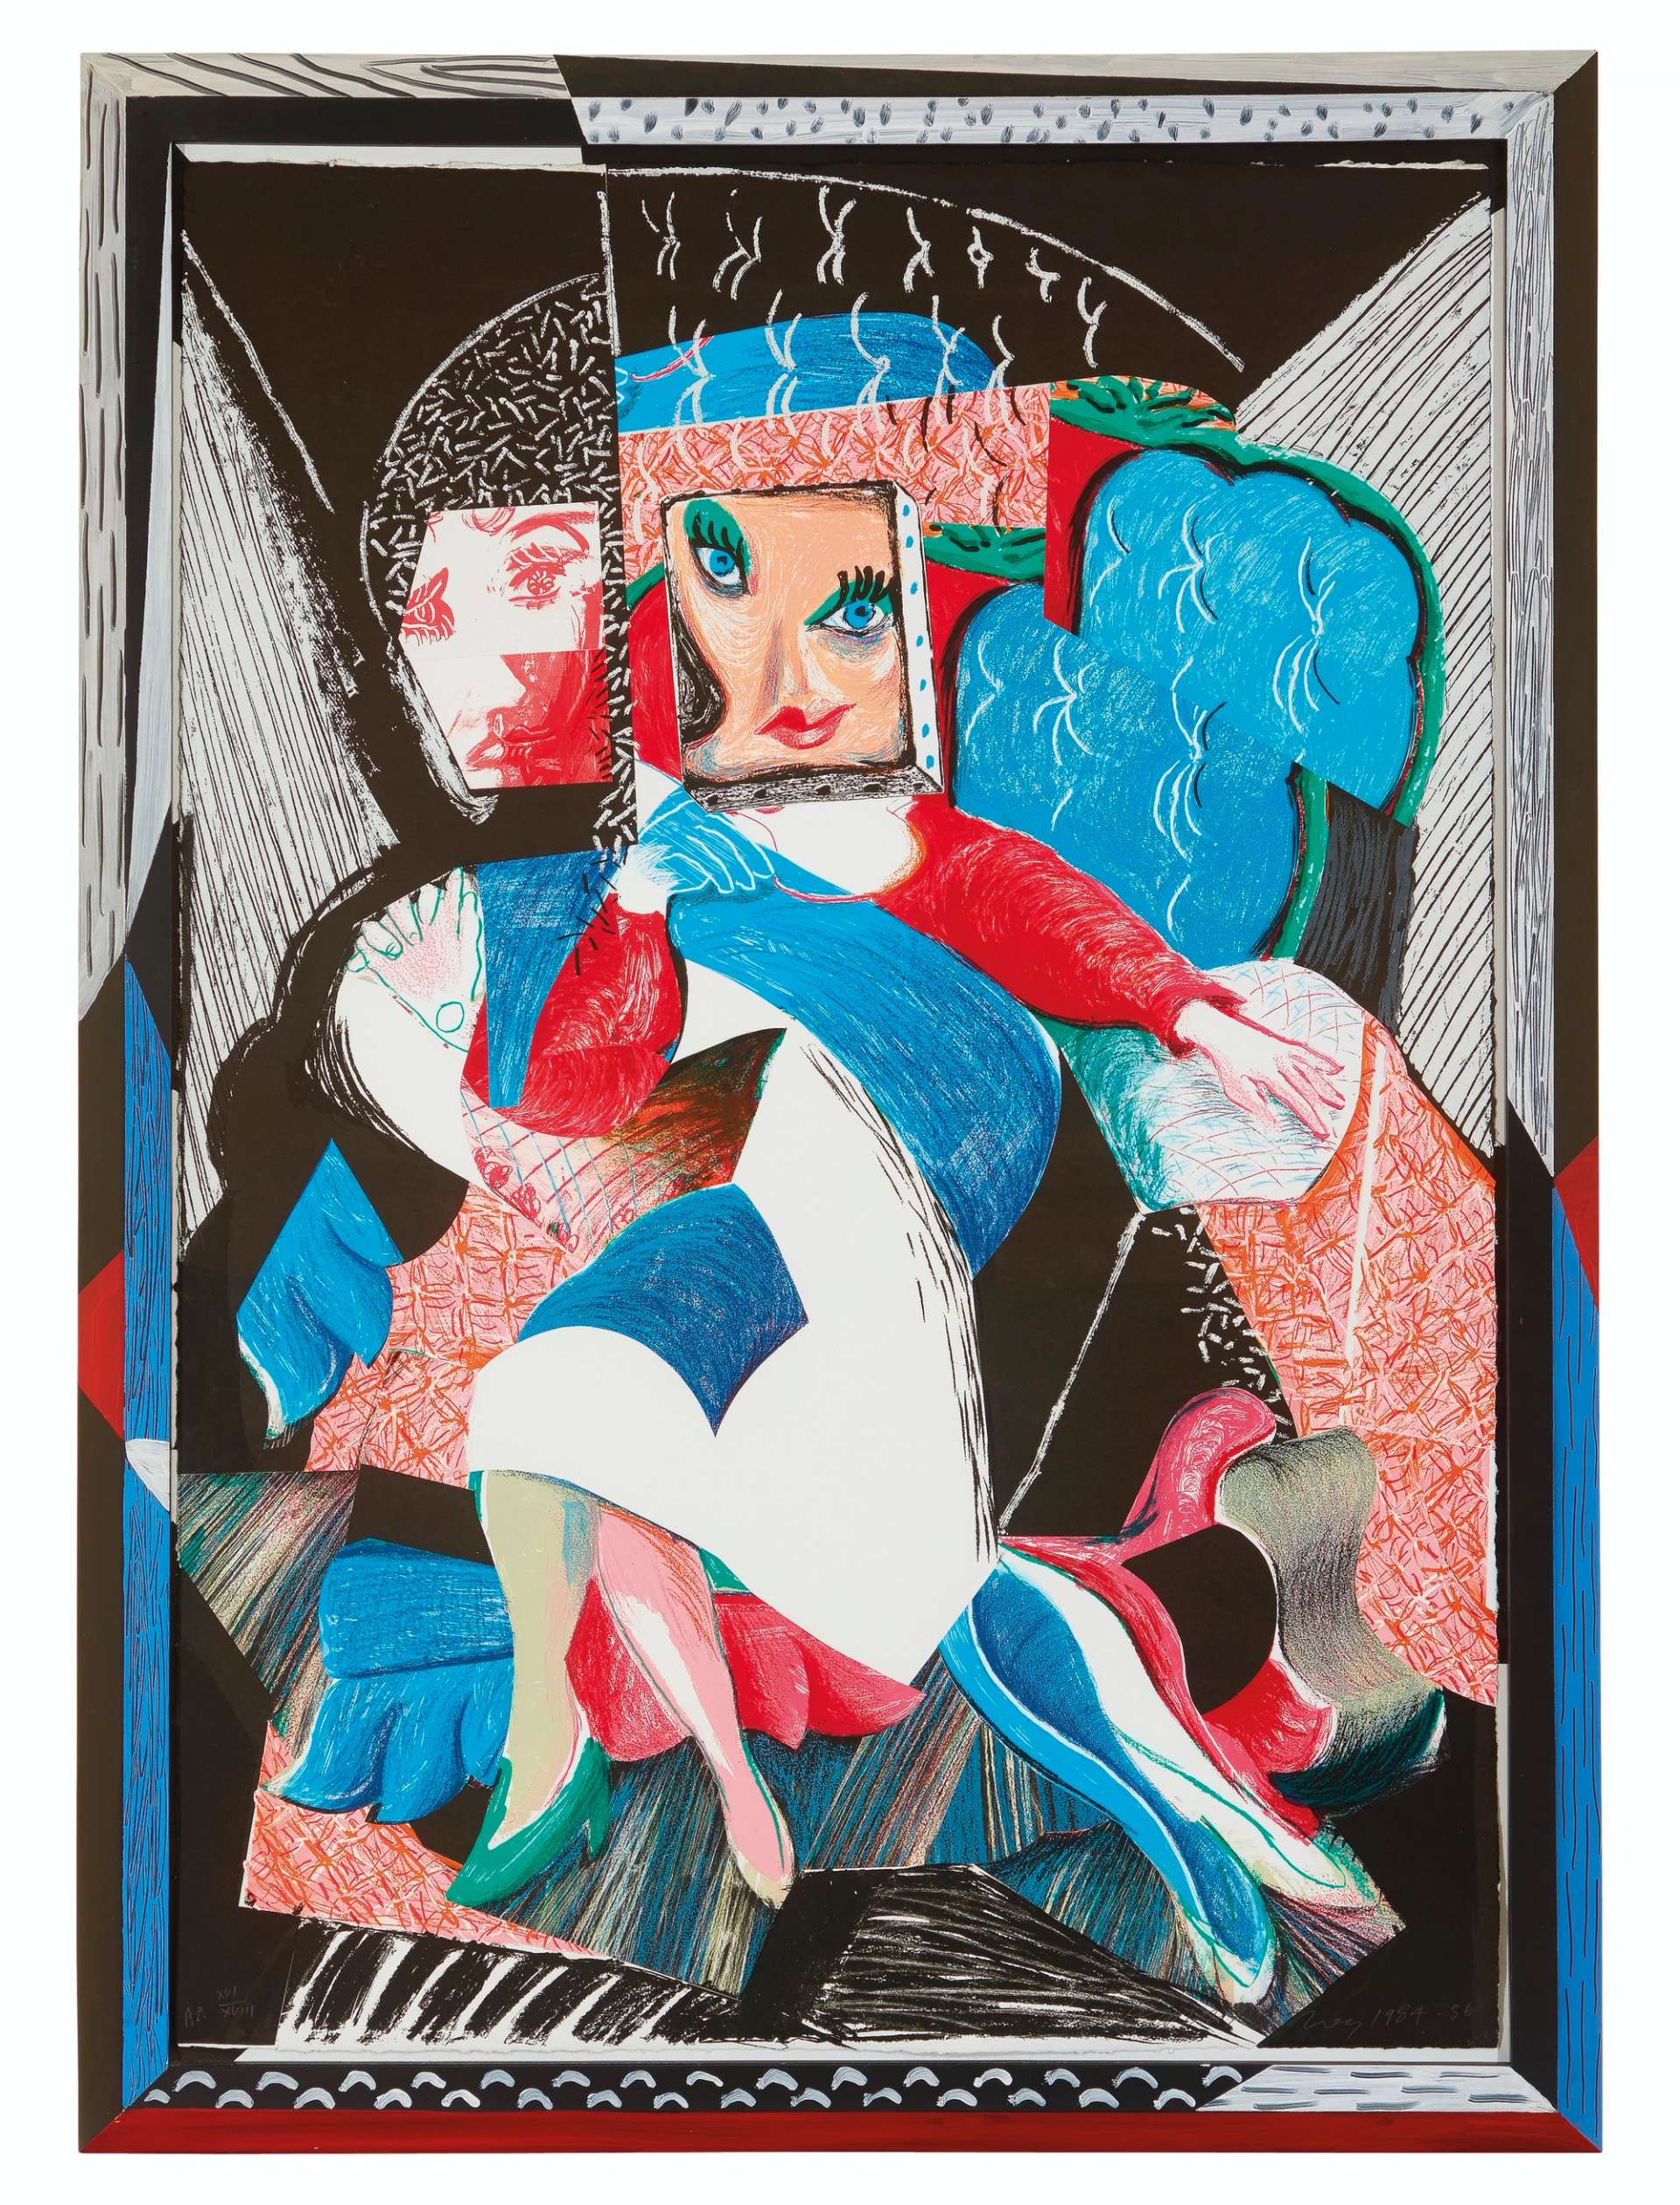 David Hockney's An Image Of Celia. A photographic print of a Cubist style 